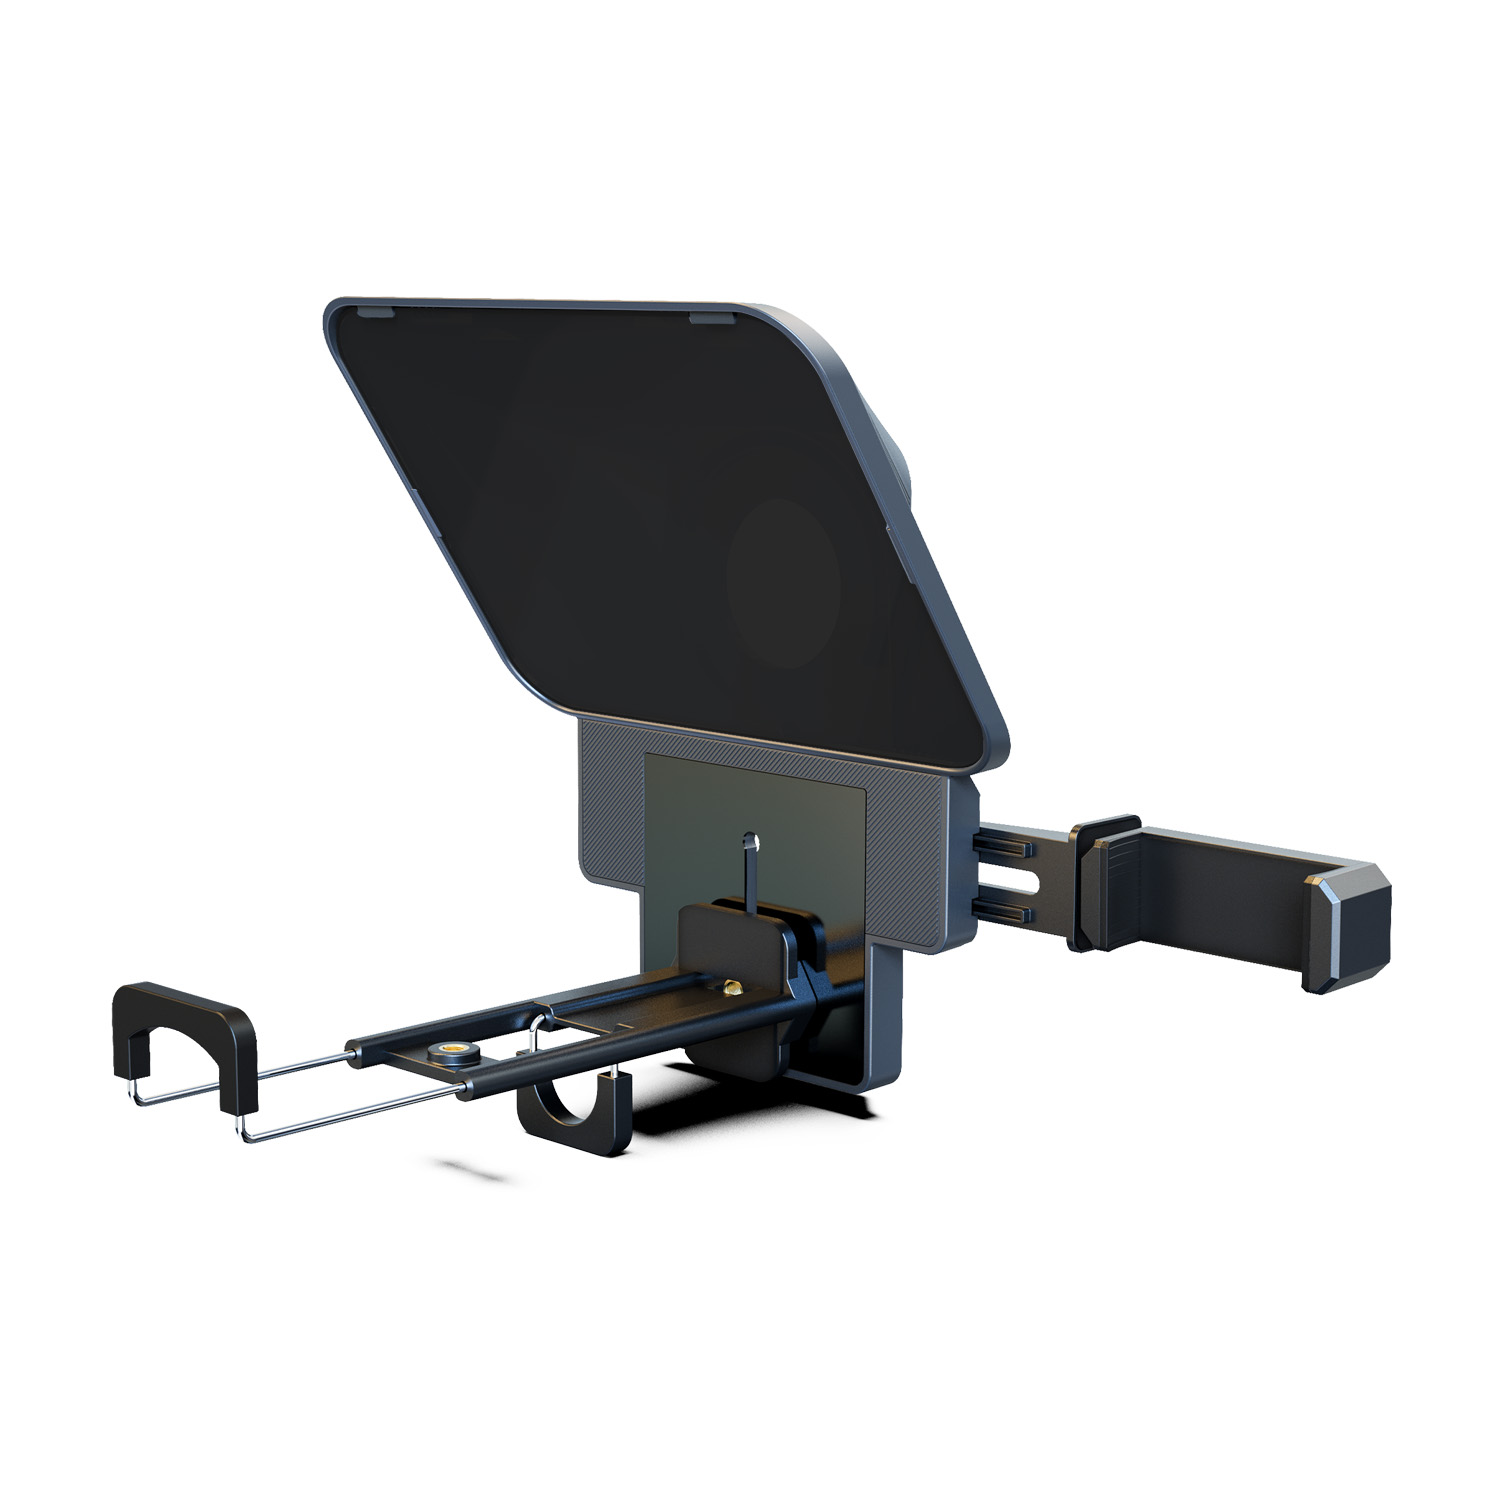 Lilliput 11 inch teleprompter